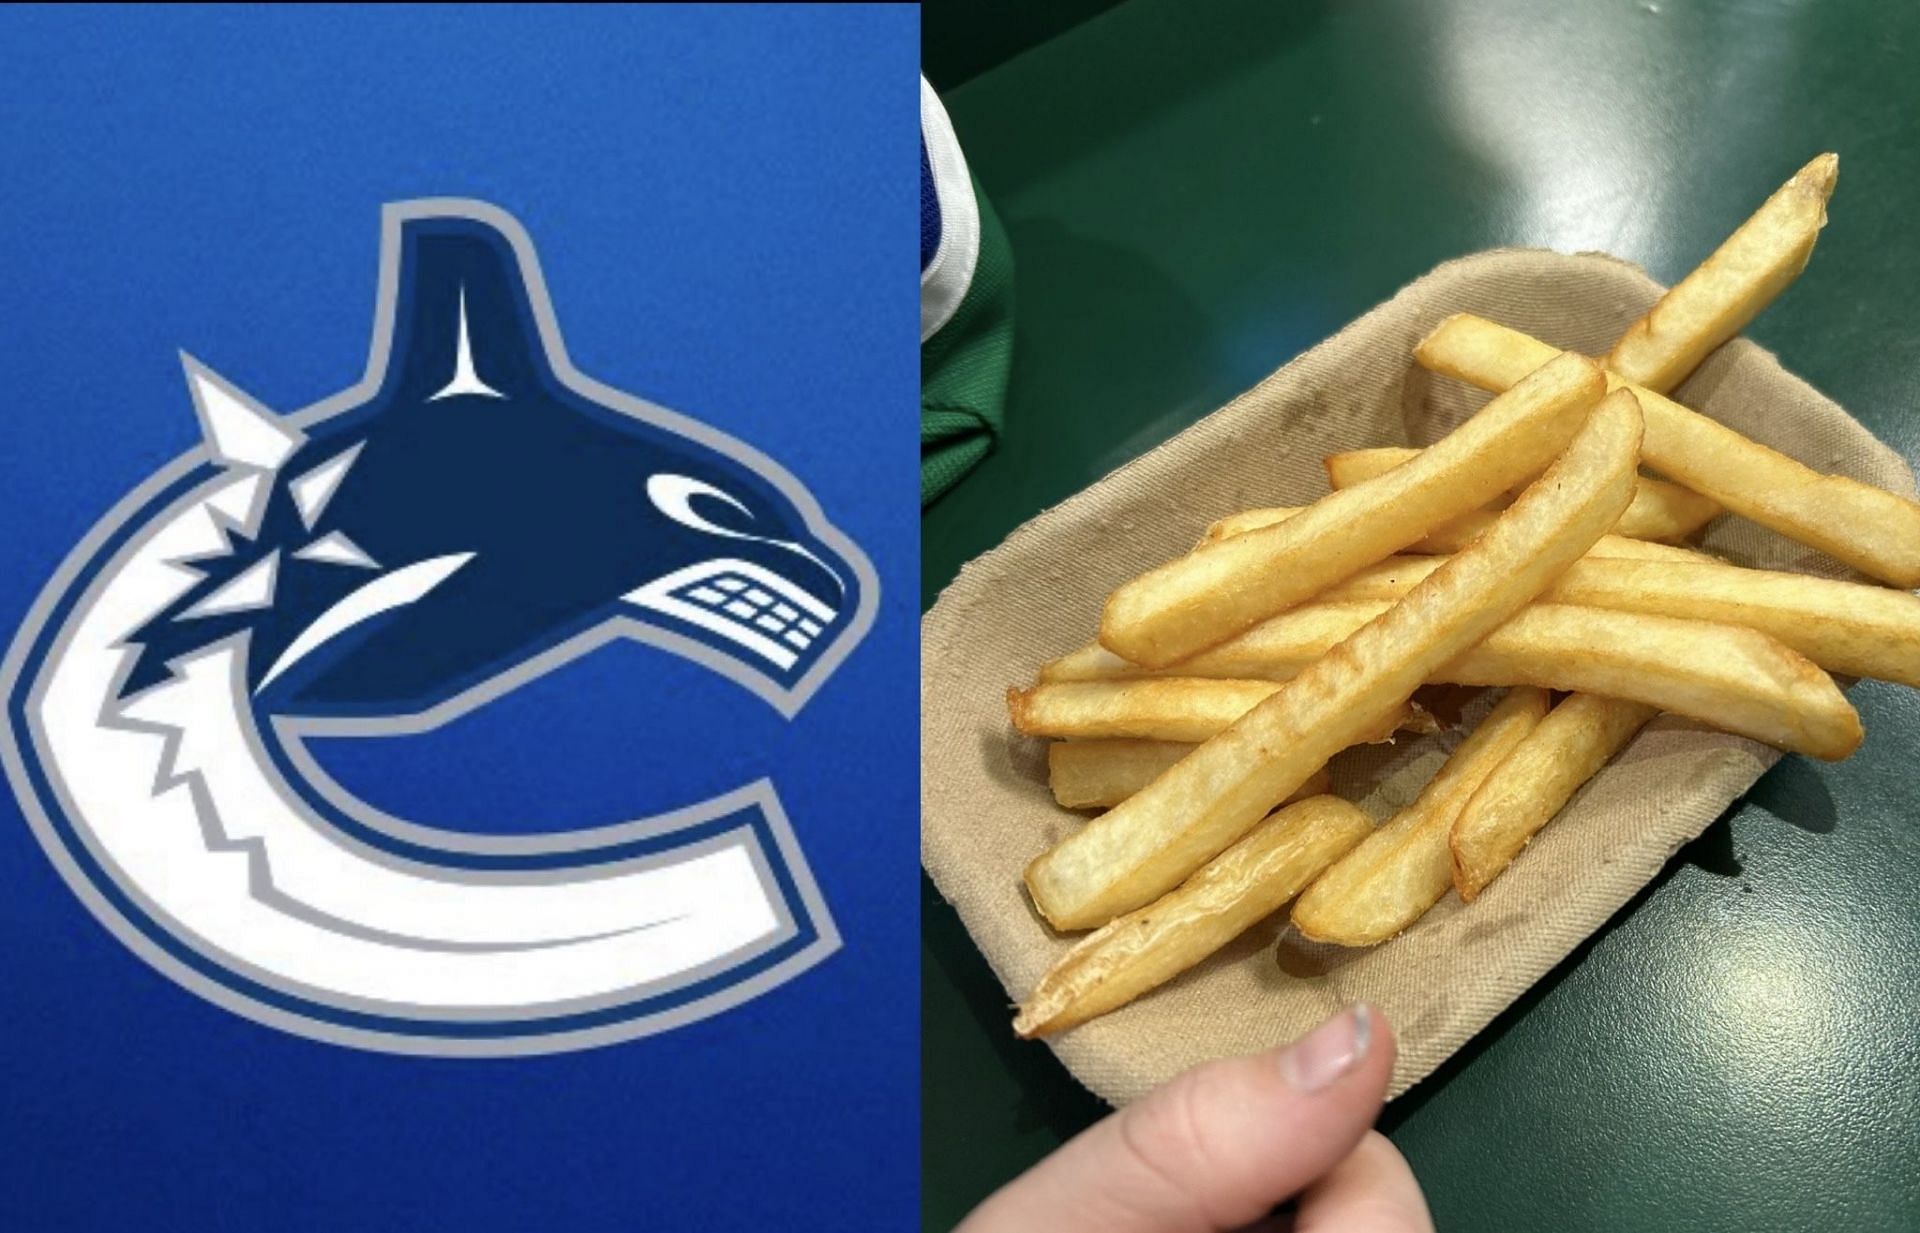 Social media reacts to &quot;criminal&quot; $7.99 pricing for fries at Vancouver Canucks